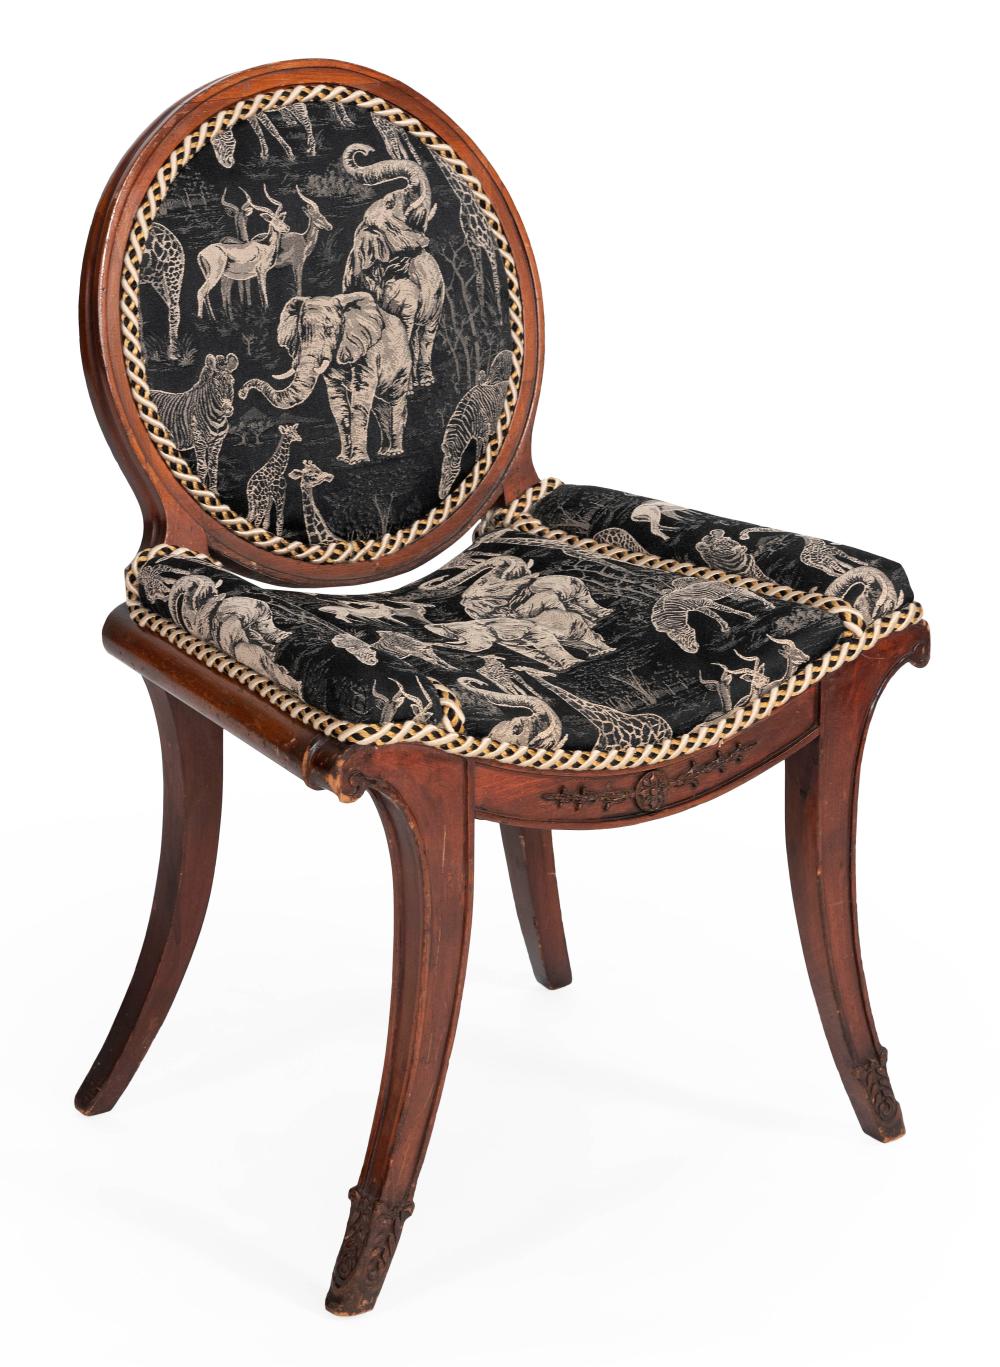 ENGLISH SIDE CHAIR LATE 19TH CENTURY